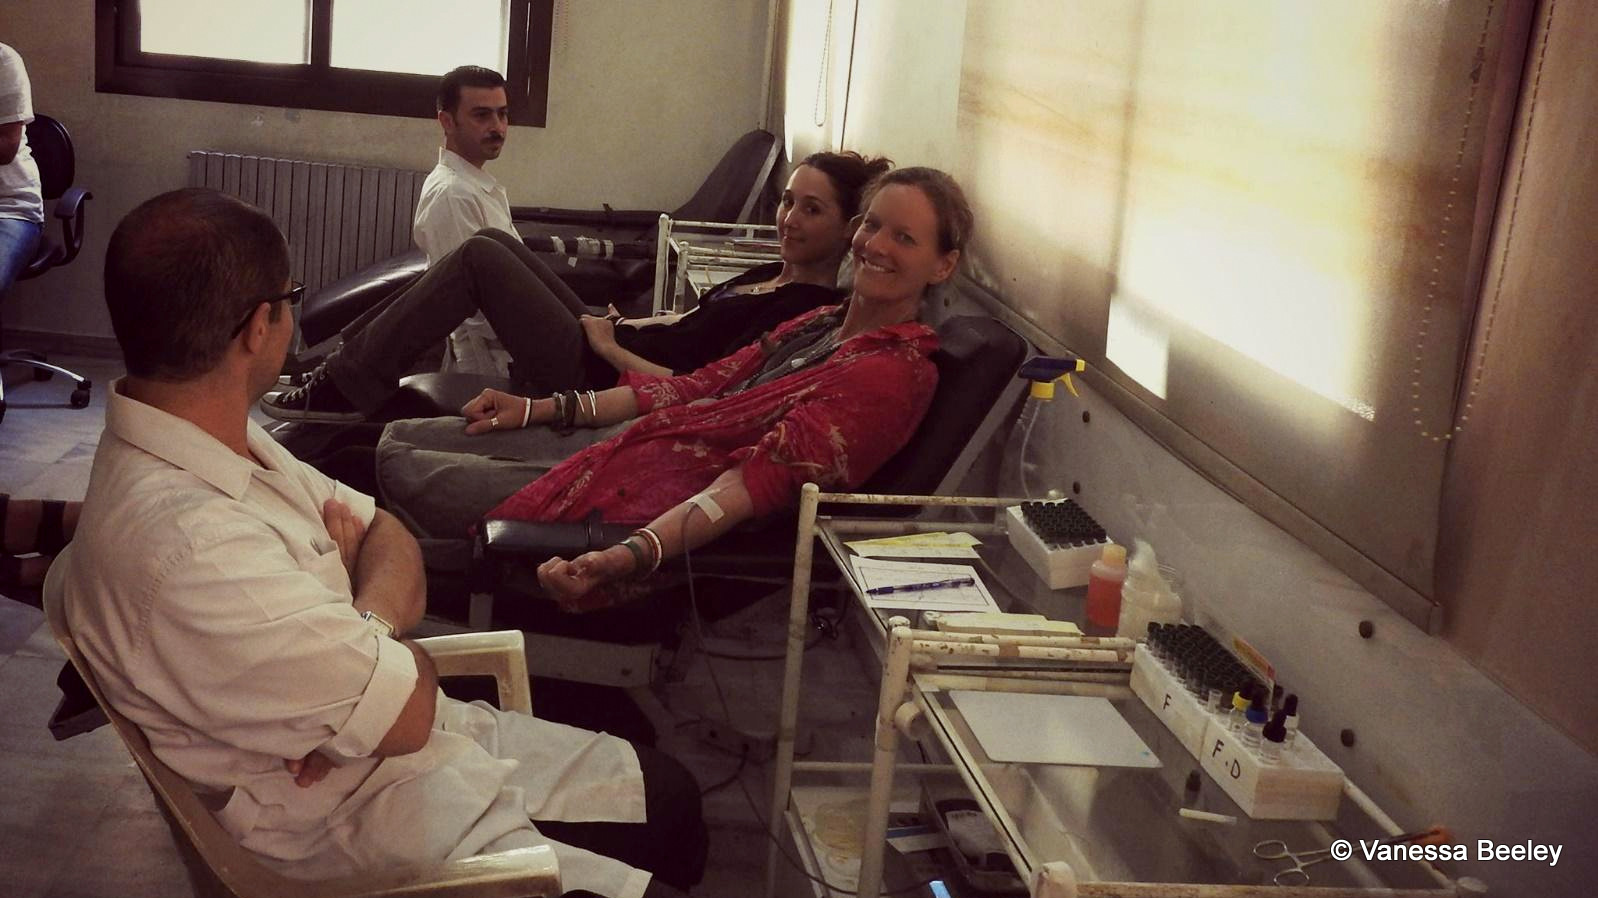 Eva Bartlett and Vanessa Beeley giving blood in Aleppo on Aug. 15, 2016. (Photo provided by Vanessa Beeley)